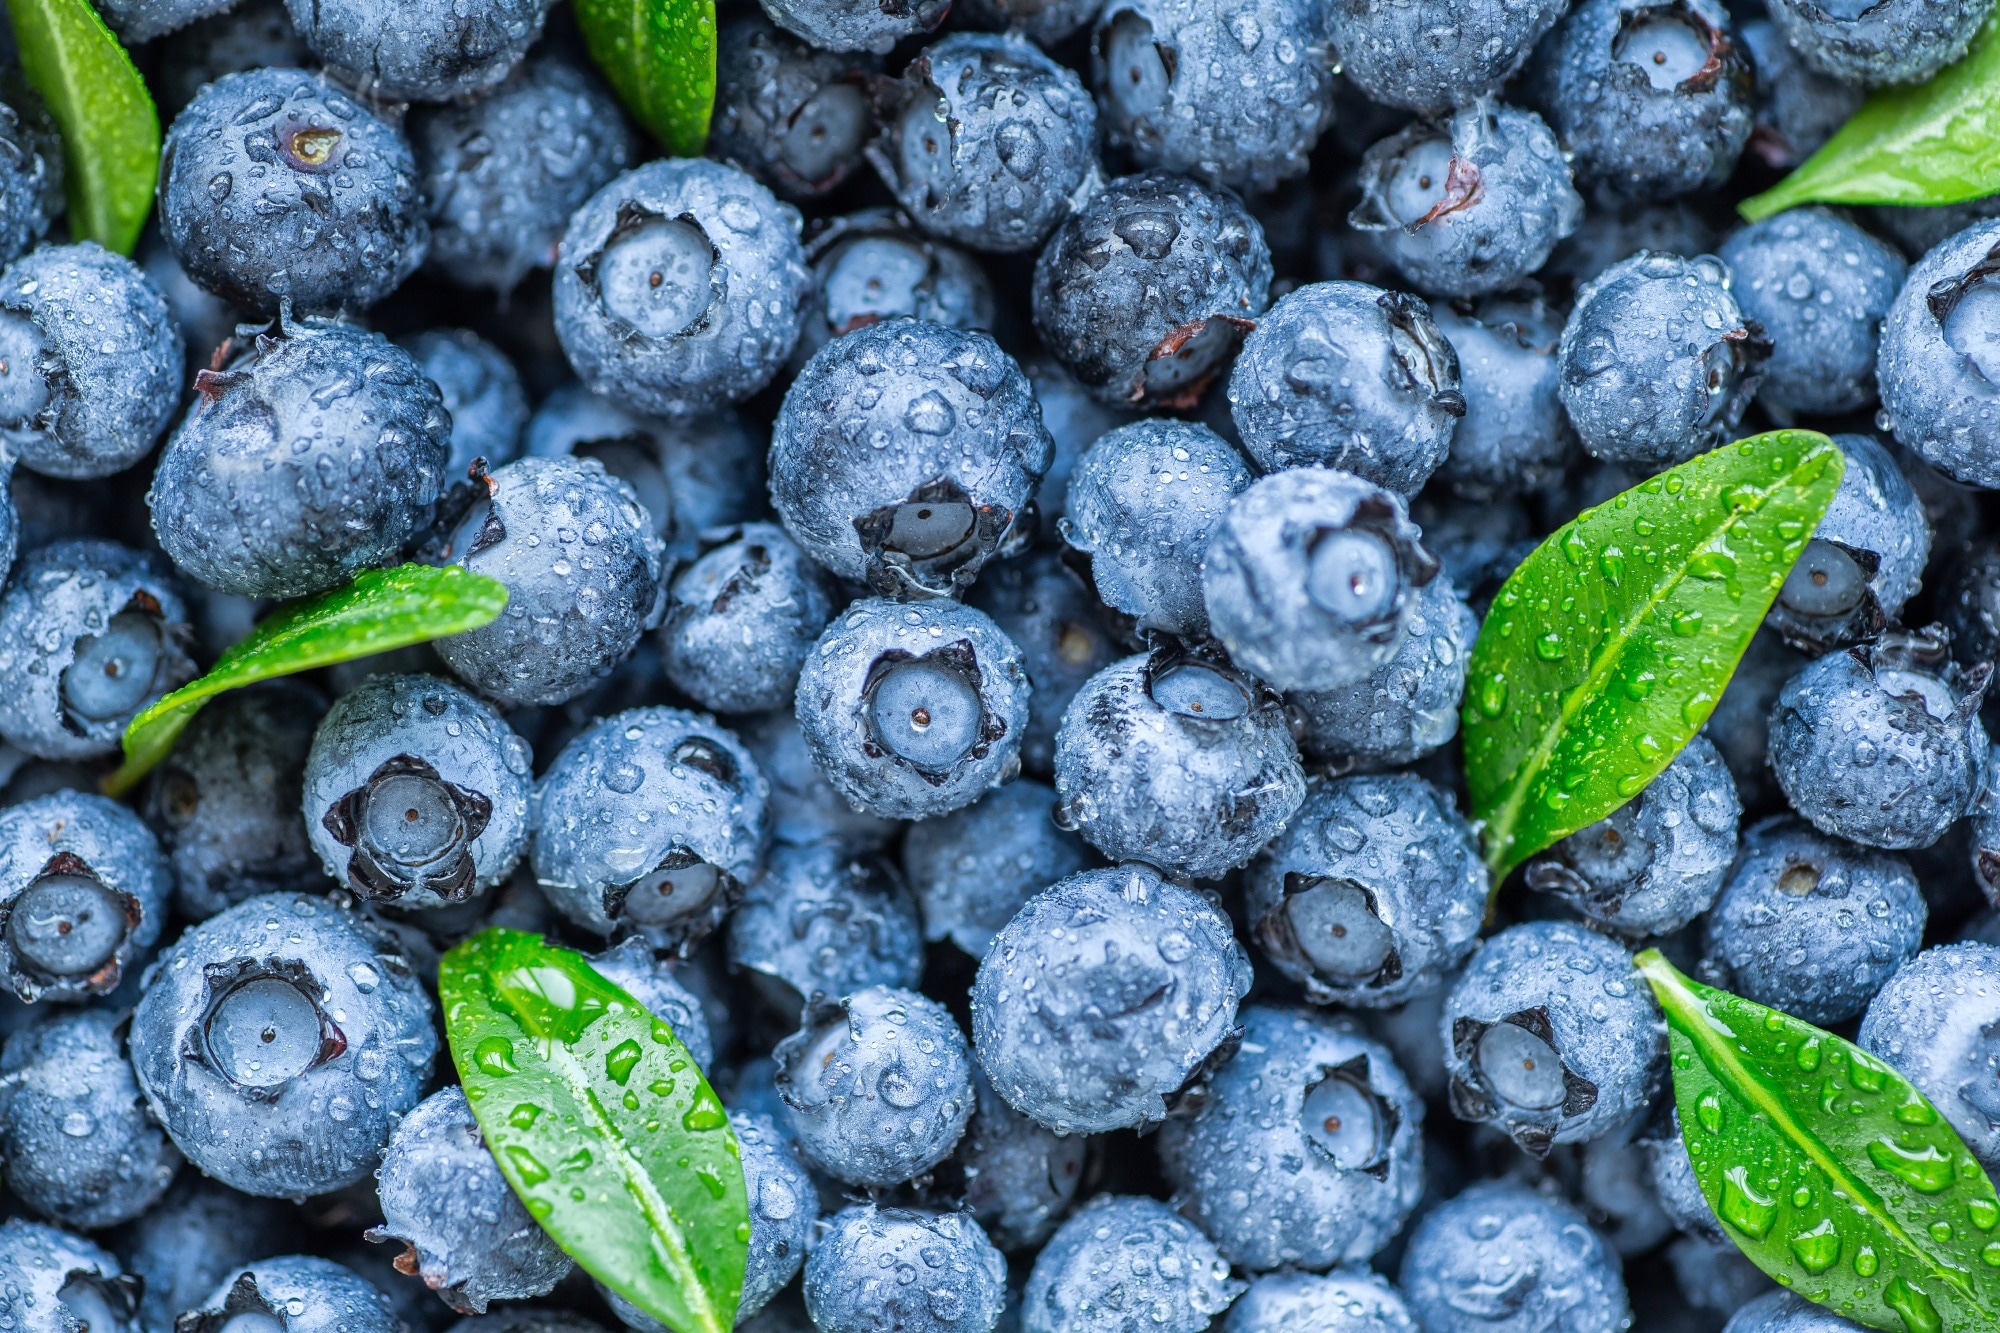 Study: Crop, Host, and Gut Microbiome Variation Influence Precision Nutrition: An Example of Blueberries. Image Credit: BukhtaYurii/Shutterstock.com